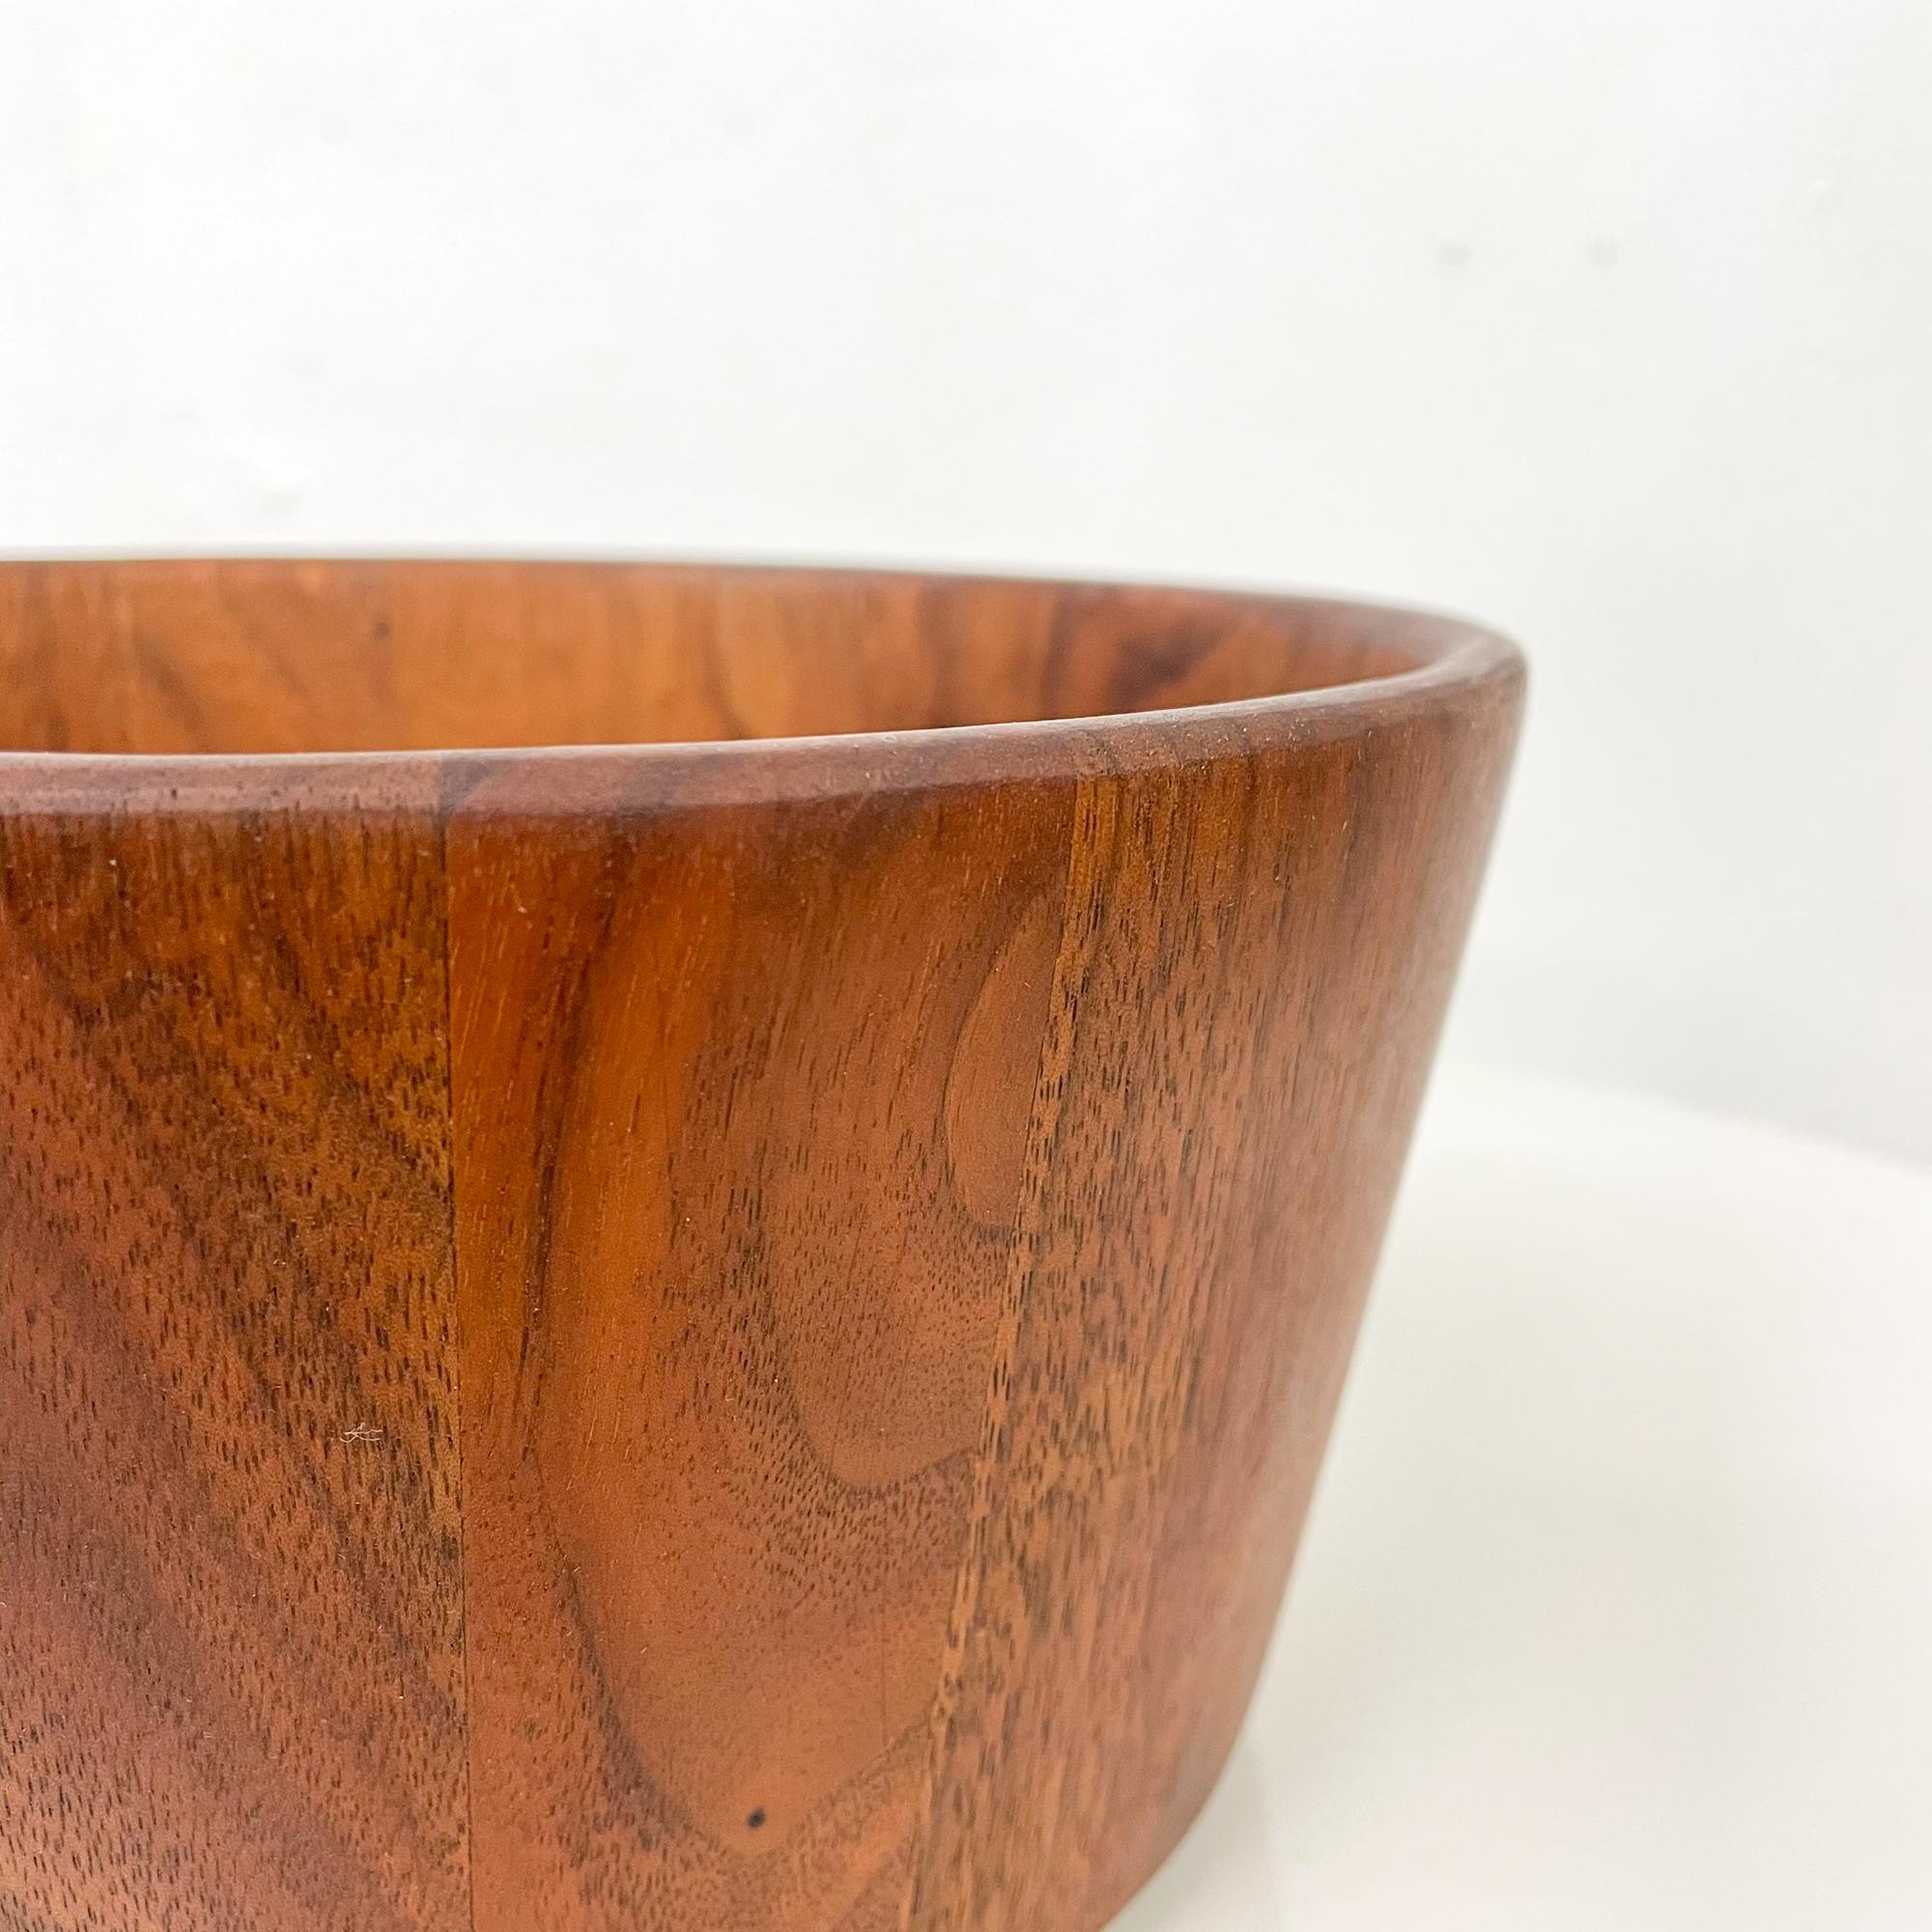 For your consideration a Mid-Century Modern walnut wood bowl.
Sculptural shape. No signature or label present from the maker. 
Made in the USA circa 1960s. 
Very good condition. Expect light vintage wear. Refer to images. 
Dimensions: 4.63